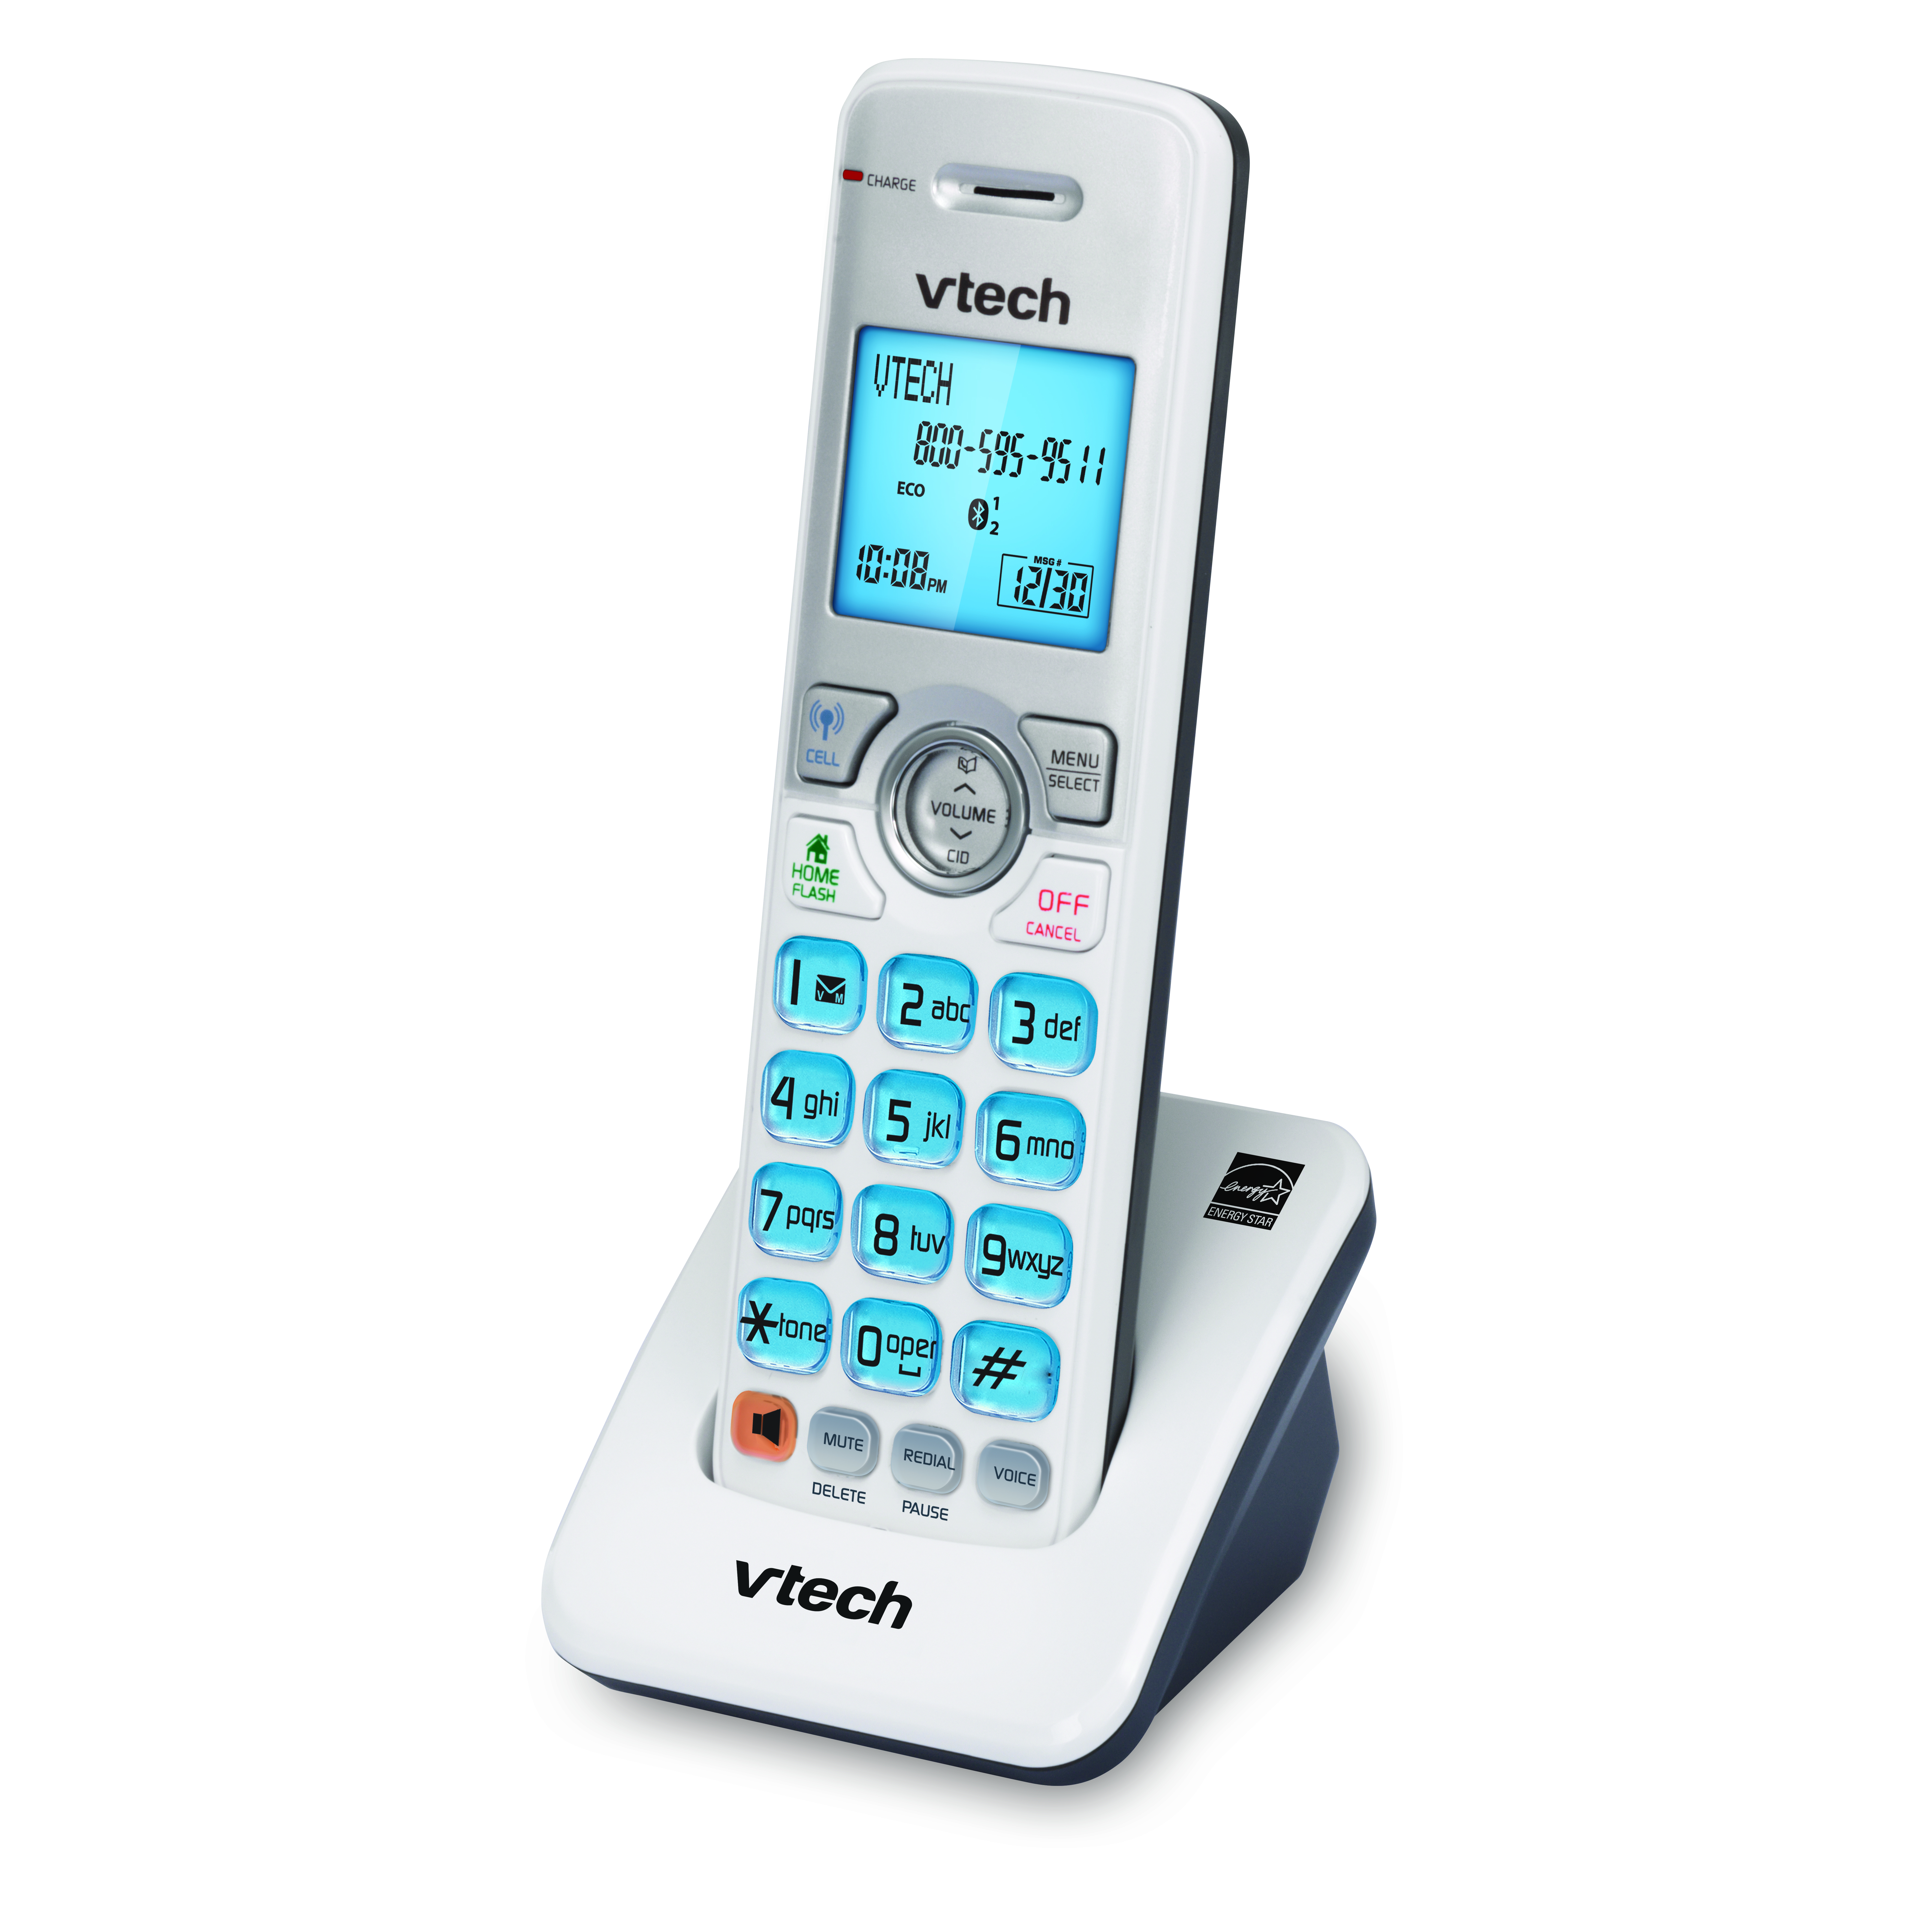 Accessory Handset with Caller ID/Call Waiting - view 2